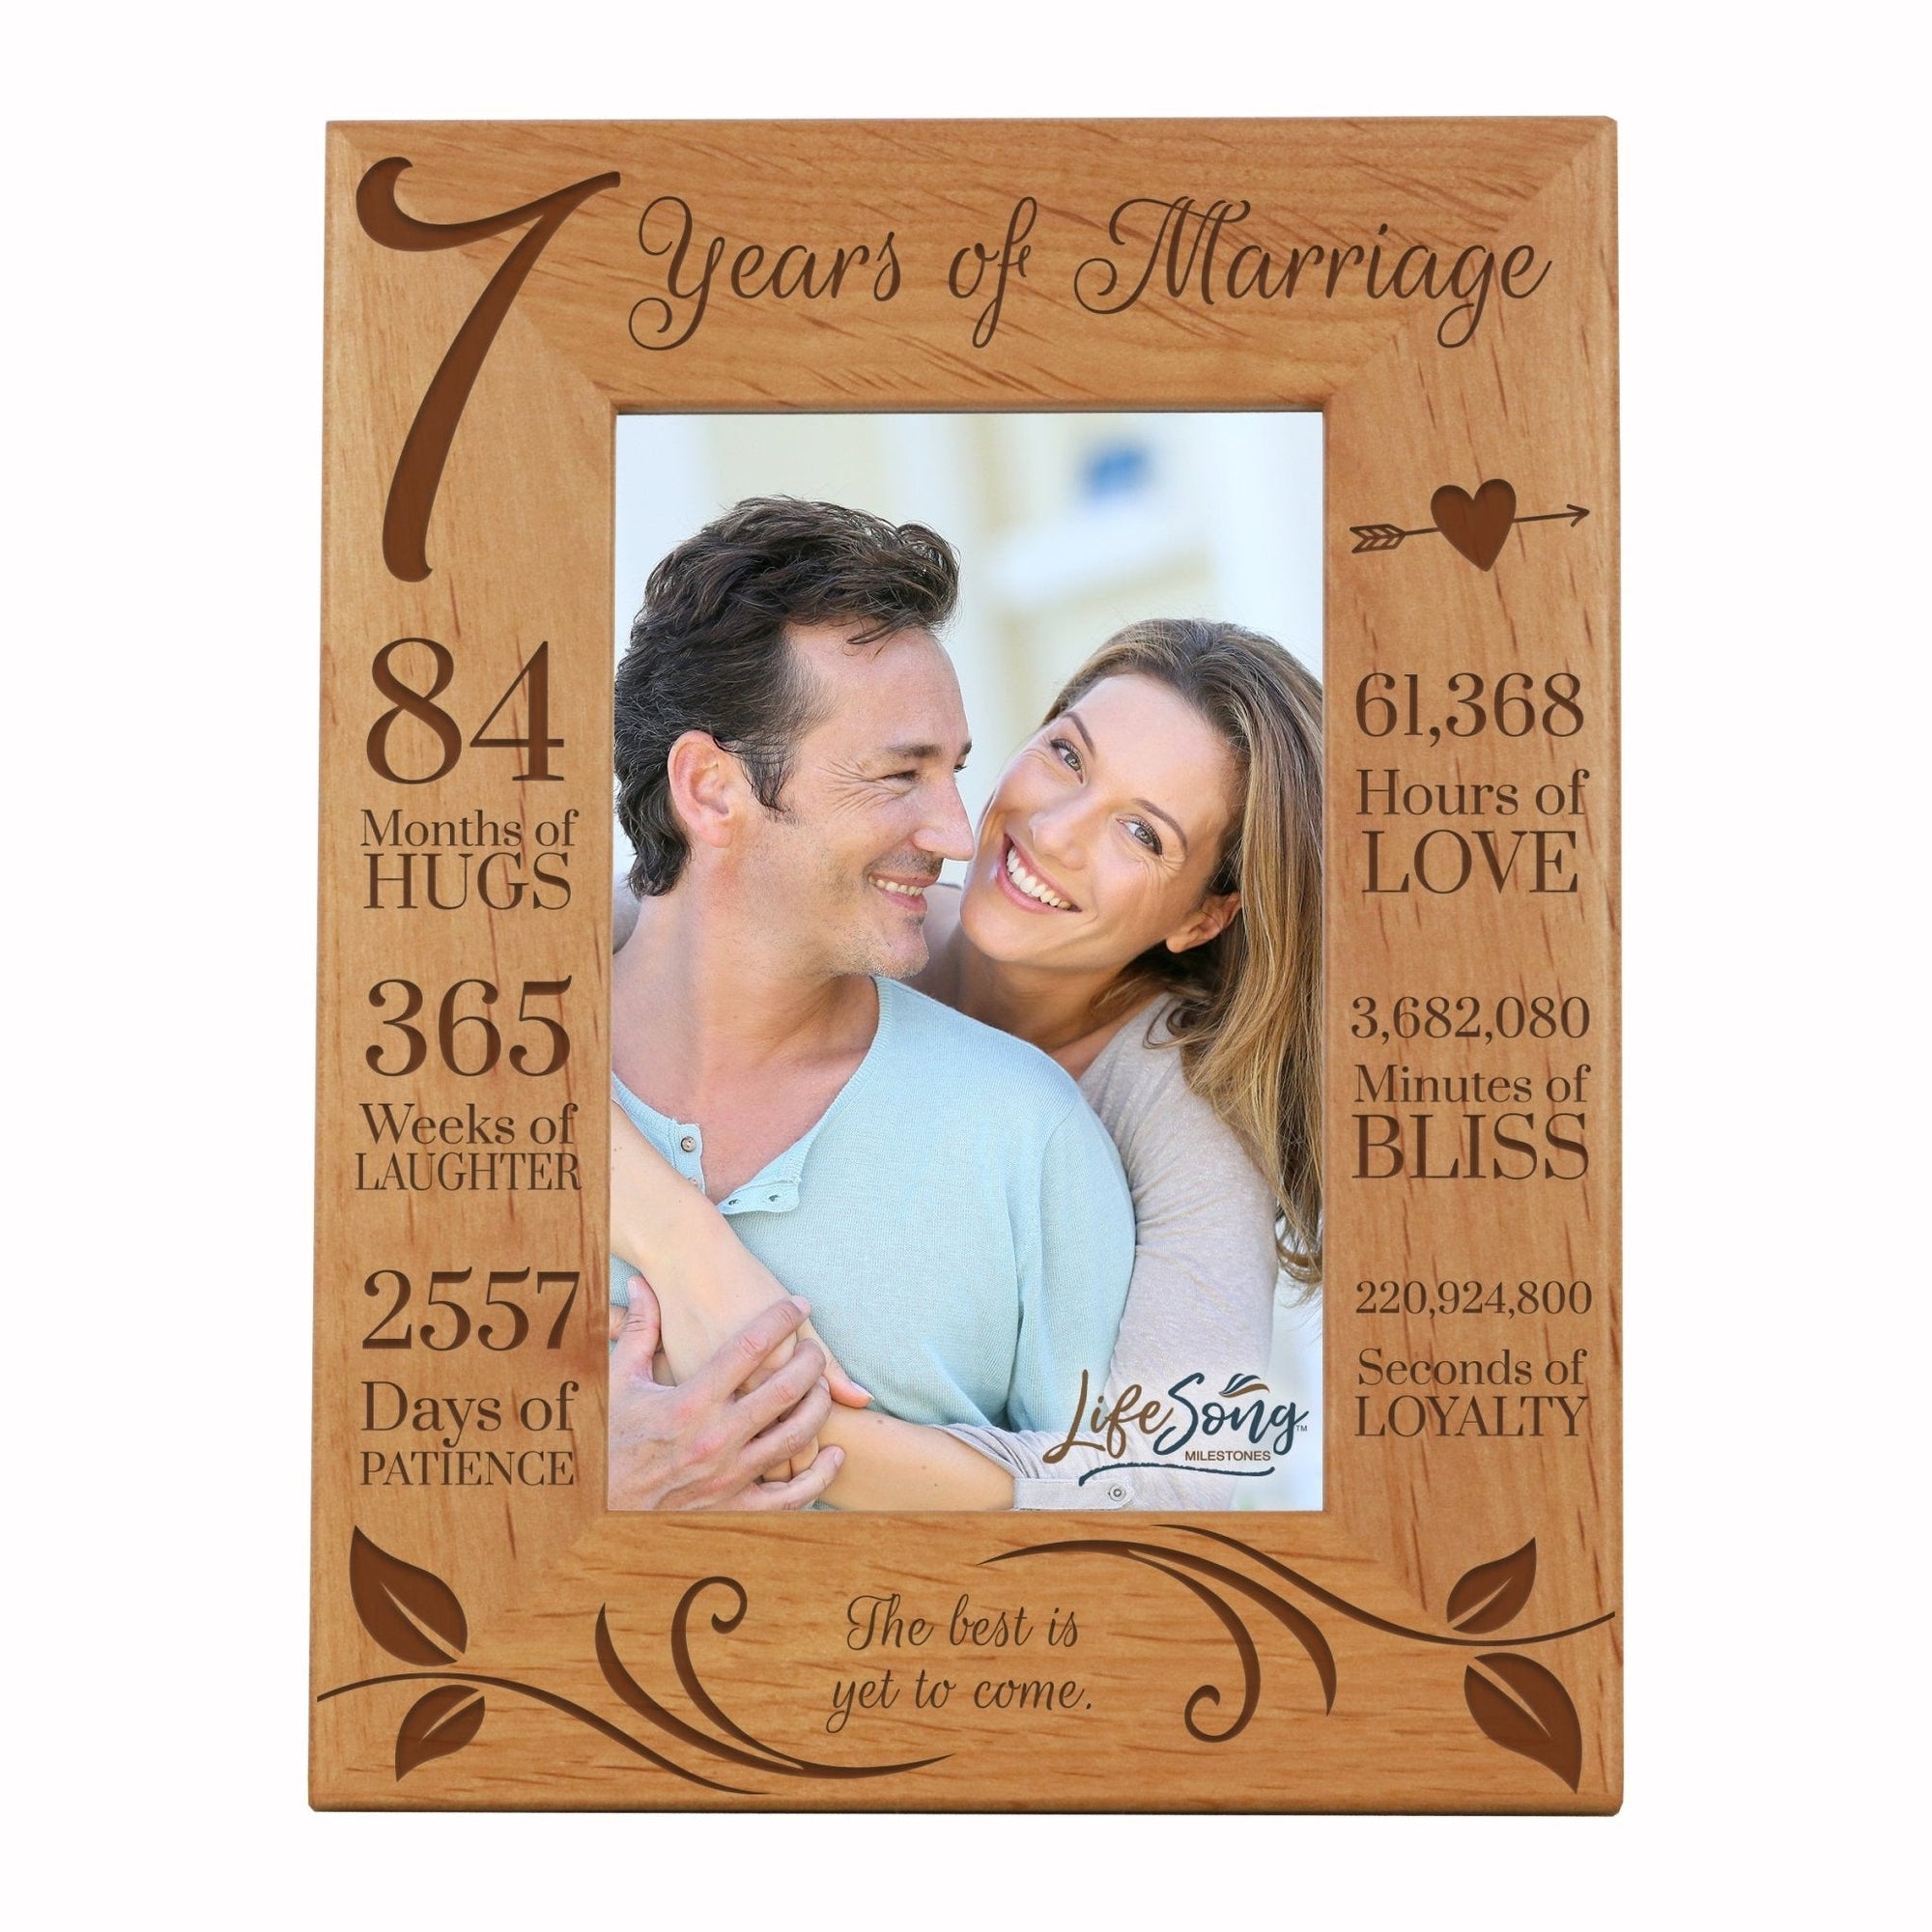 Engraved 7th Wedding Anniversary Photo Frame Wall Decor Gift for Couples - Yet To Come - LifeSong Milestones